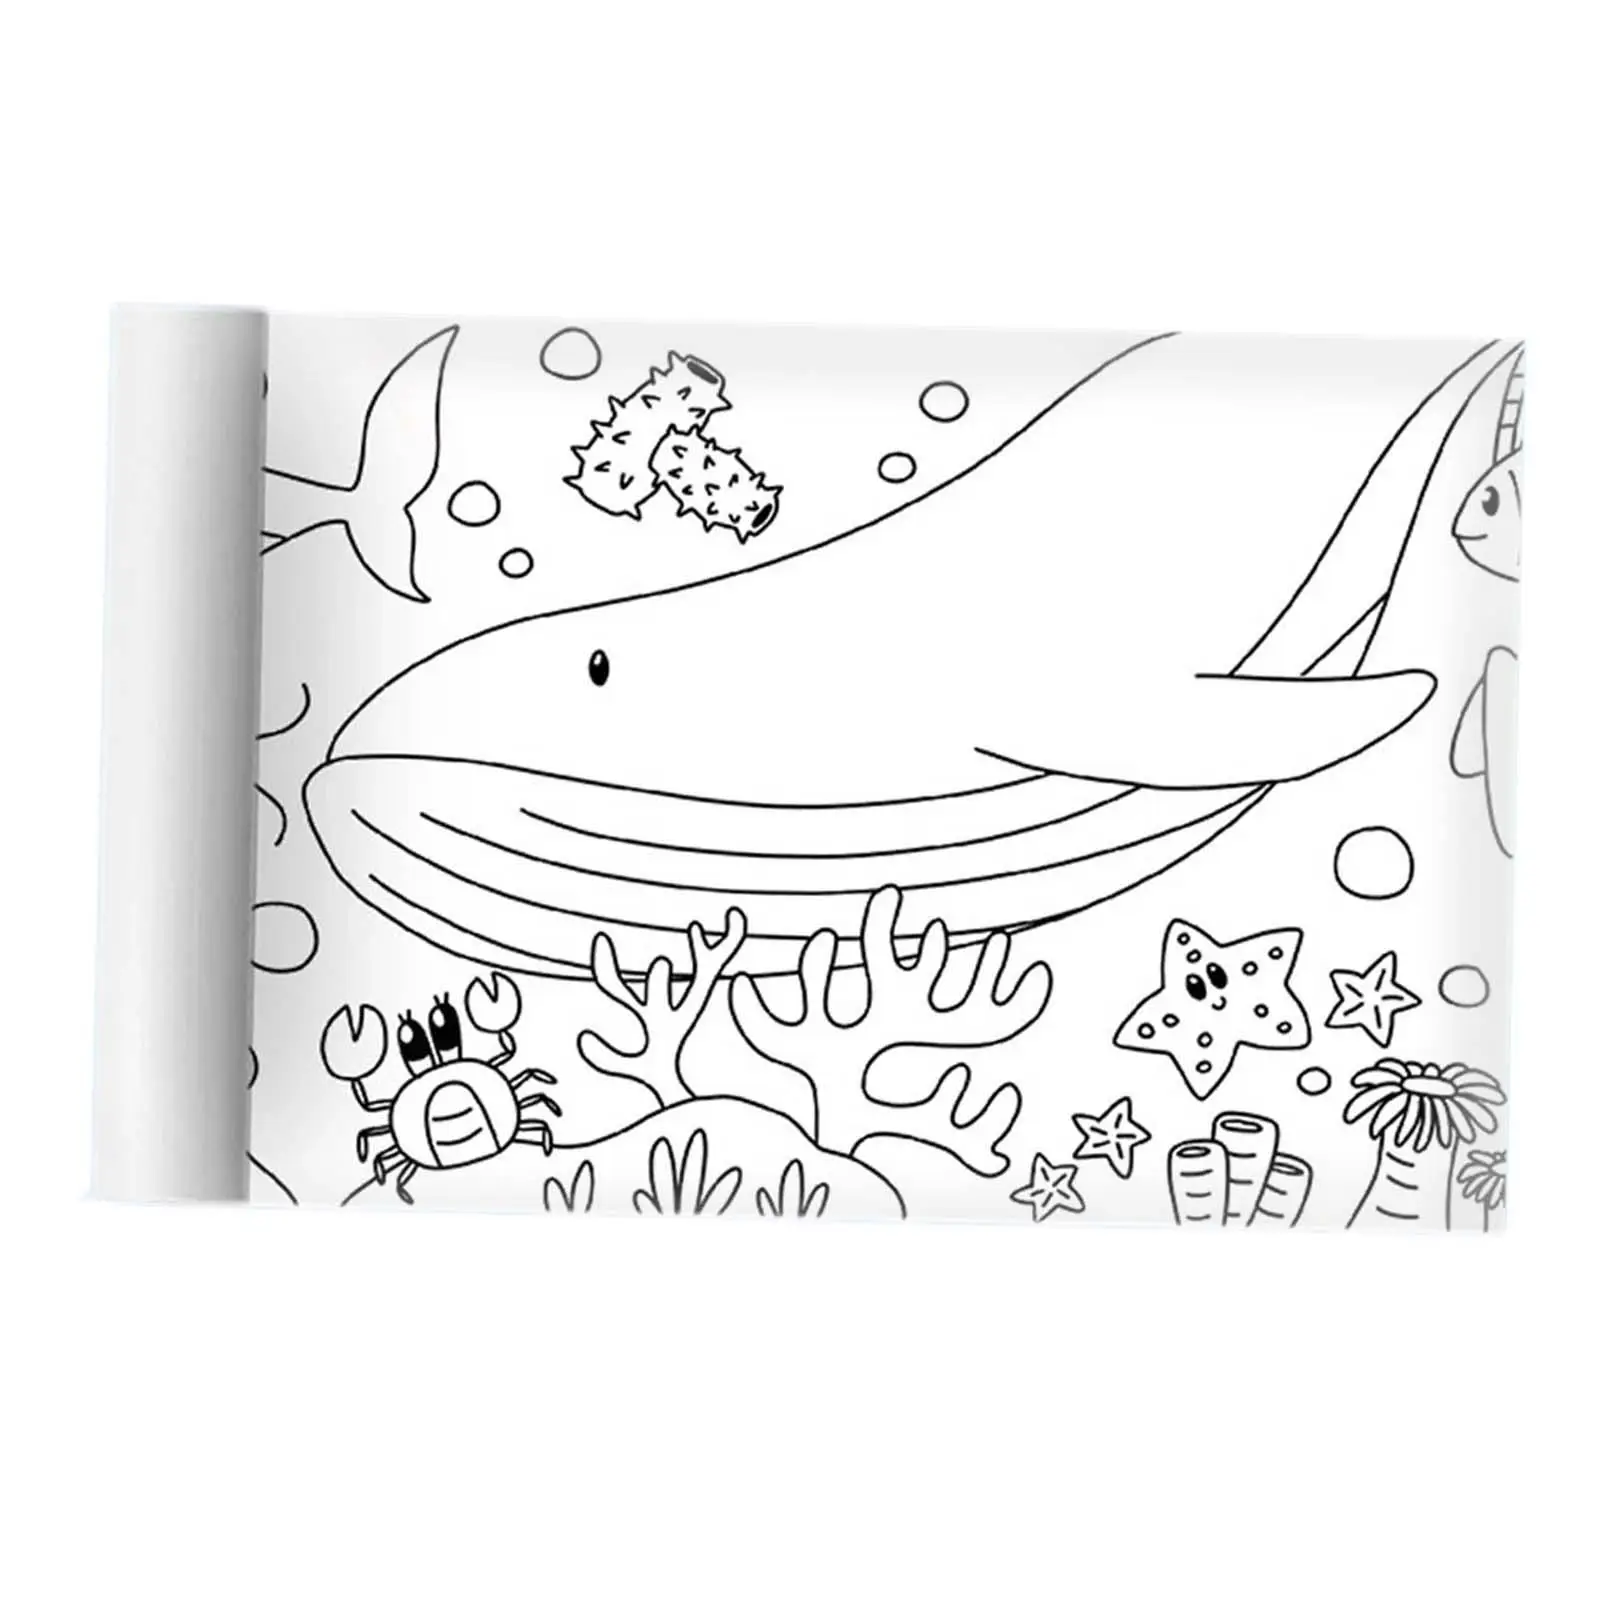 Coloring Paper Roll Paper Crafts Large Coloring Books Coloring Tablecloth for Kids Gift